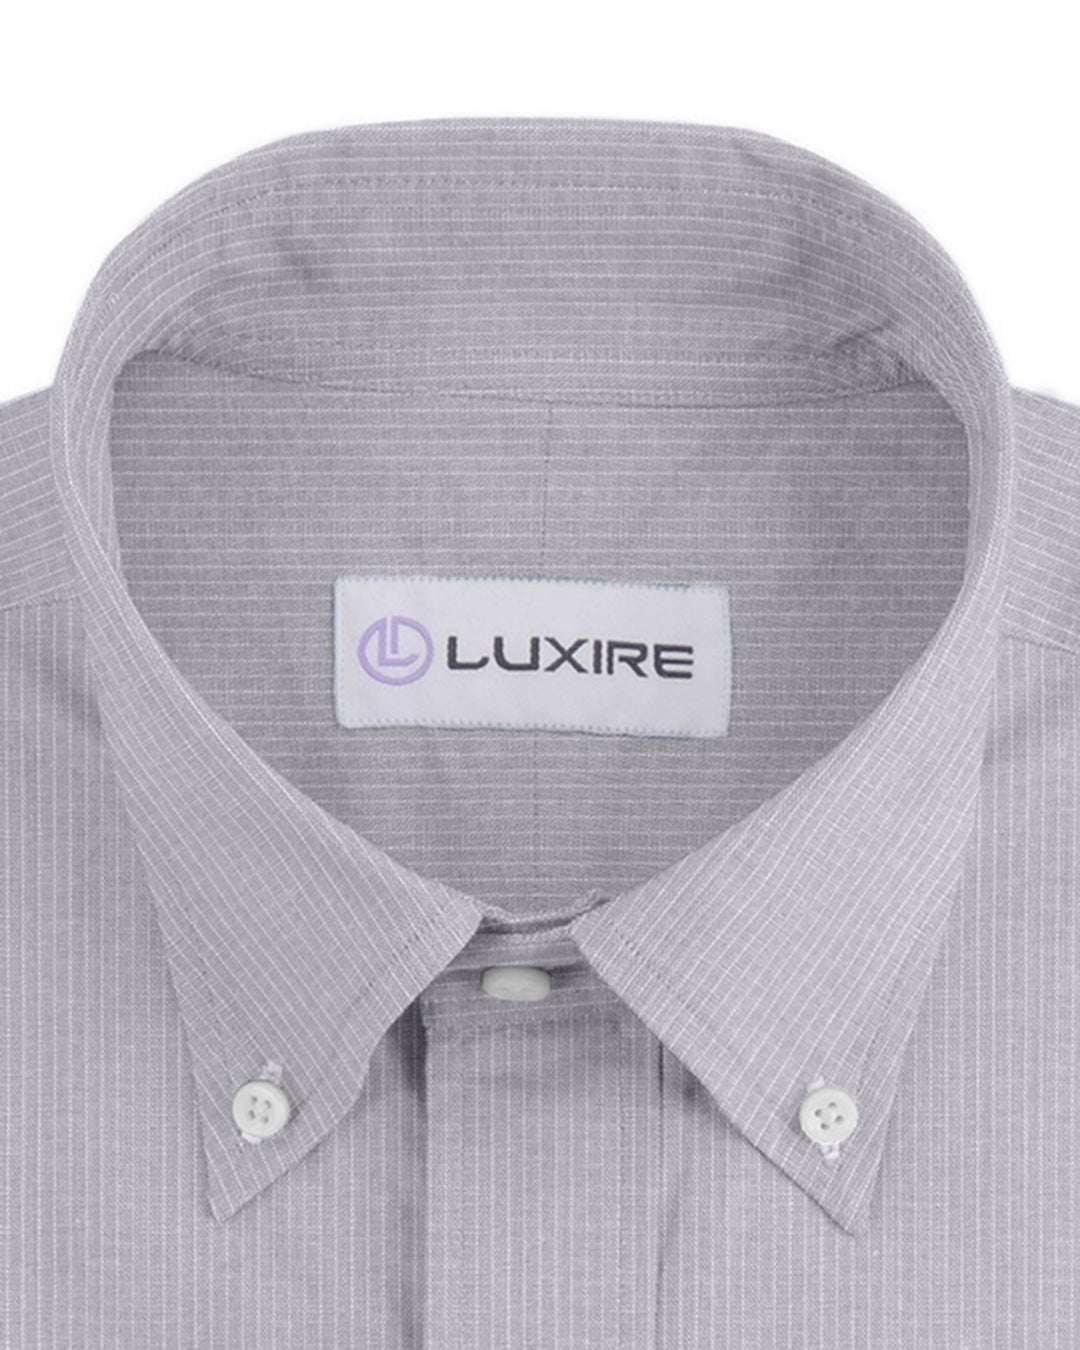 Collar of the custom linen shirt for men in grey with thin white stripes by Luxire Clothing